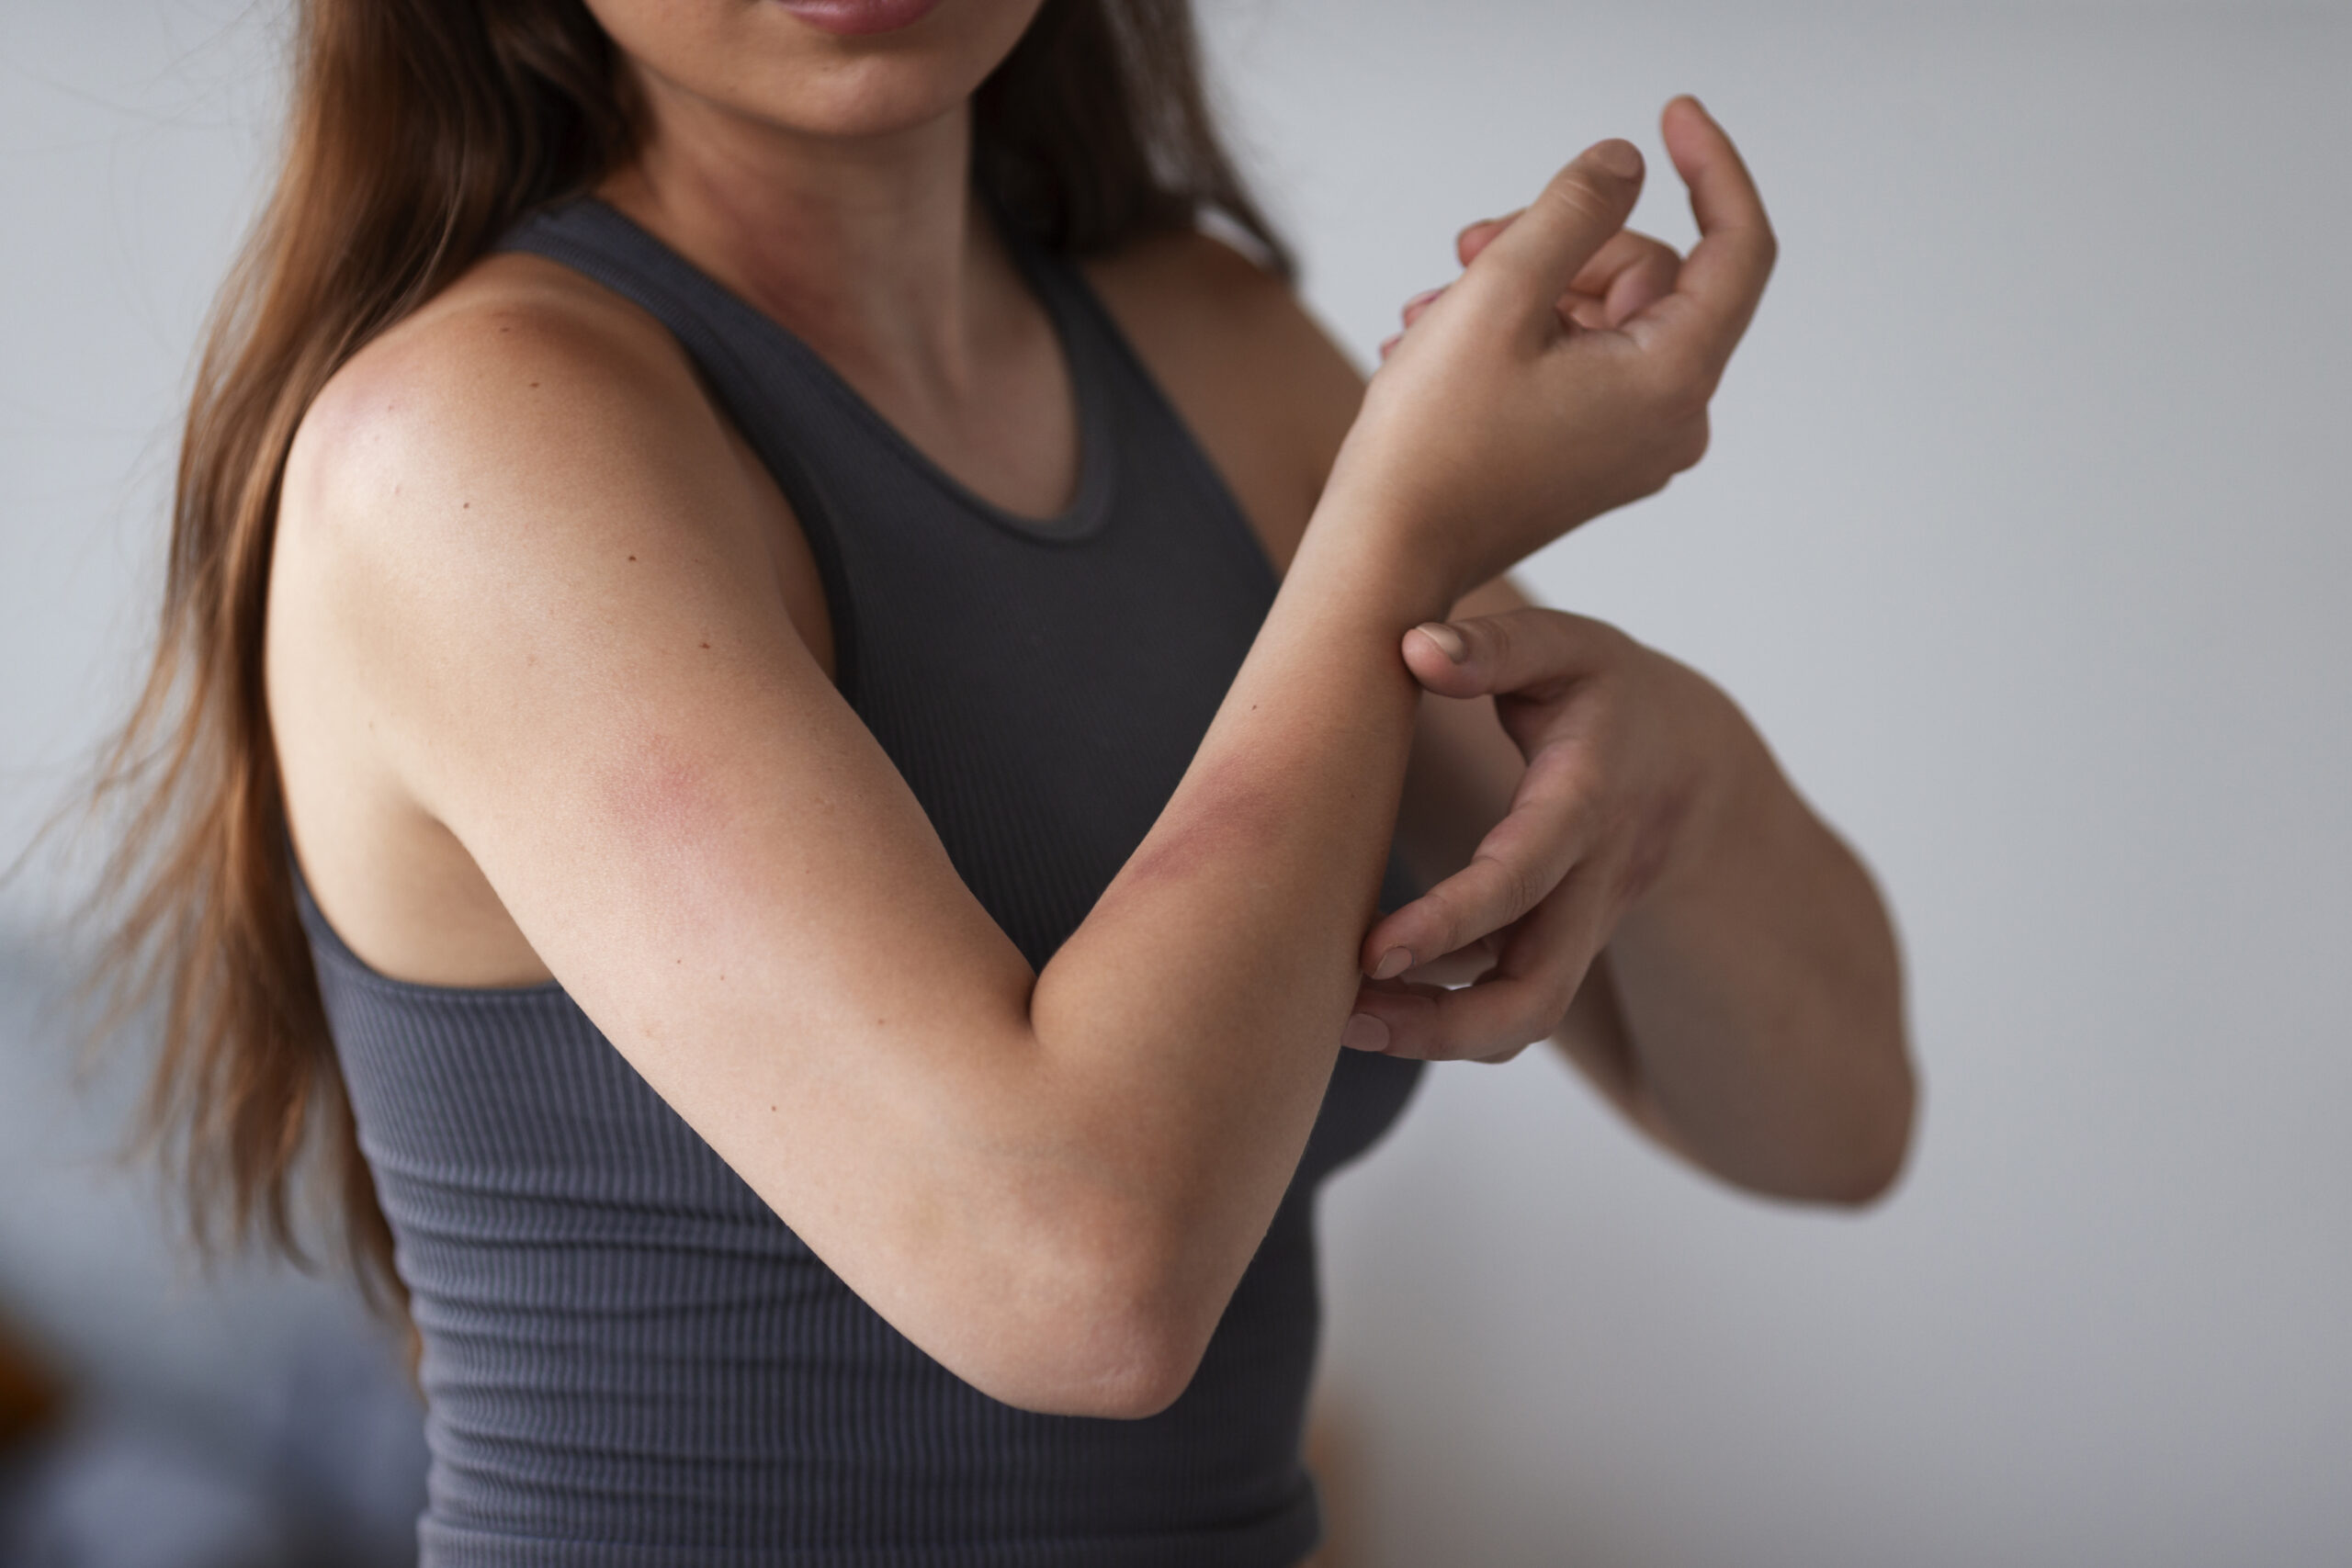 Heat Rash: What Is, Symptoms, Types, and Causes